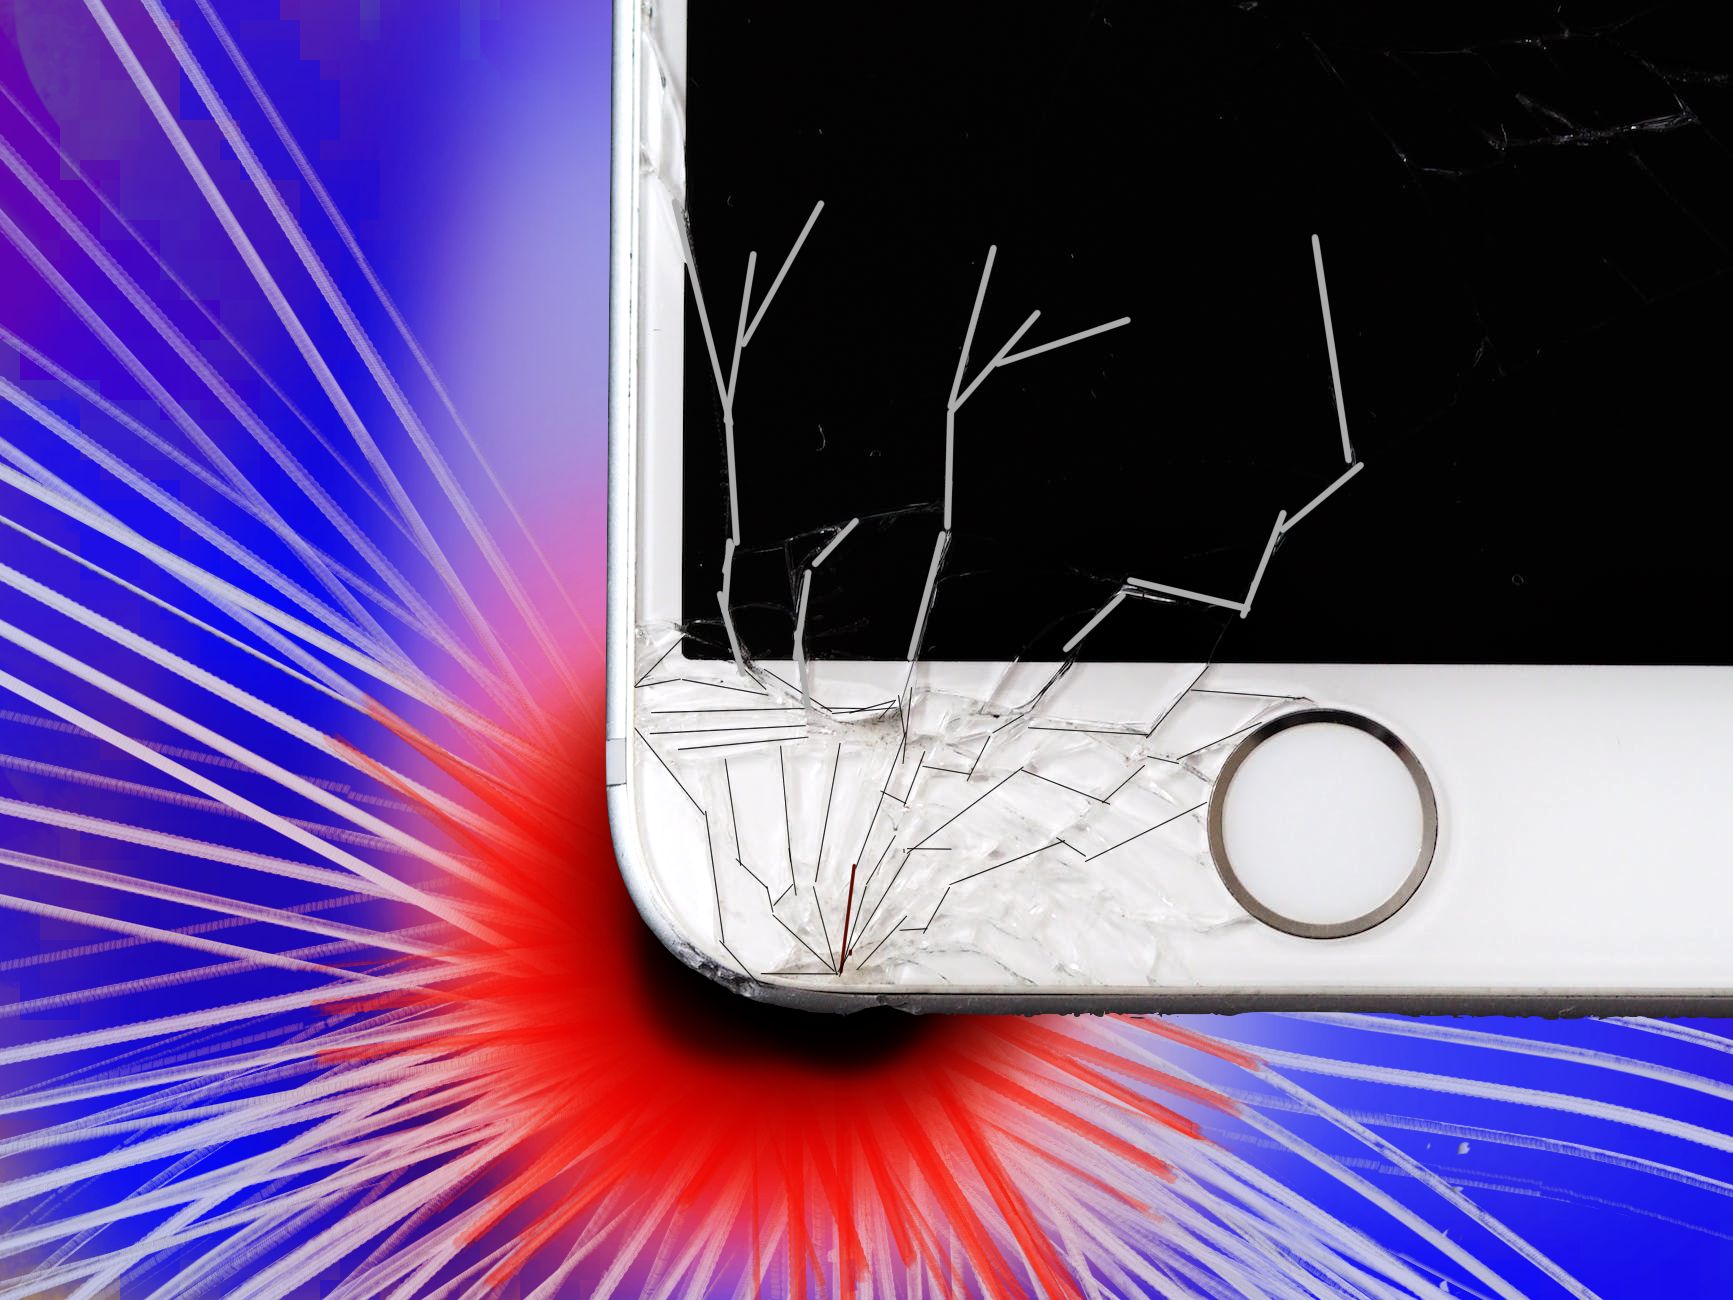 Iphone repair services Lithgow, cracked iPhone display.iphone repairs Lithgow NSW 2790